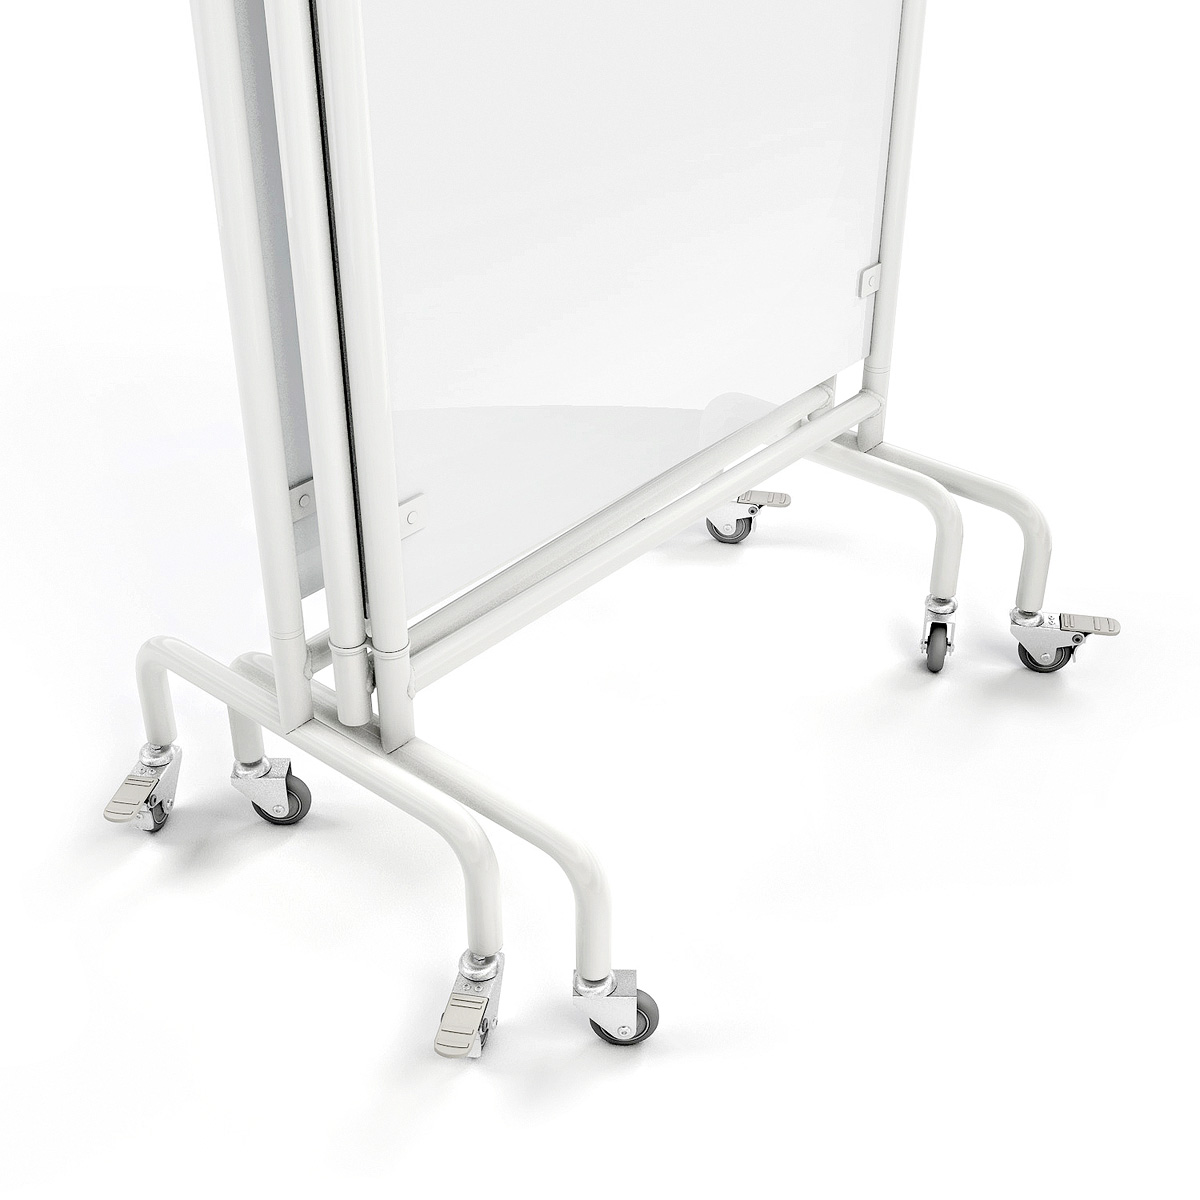 DIGNITY® Portable Medical Screens Have Locking Castor Wheels